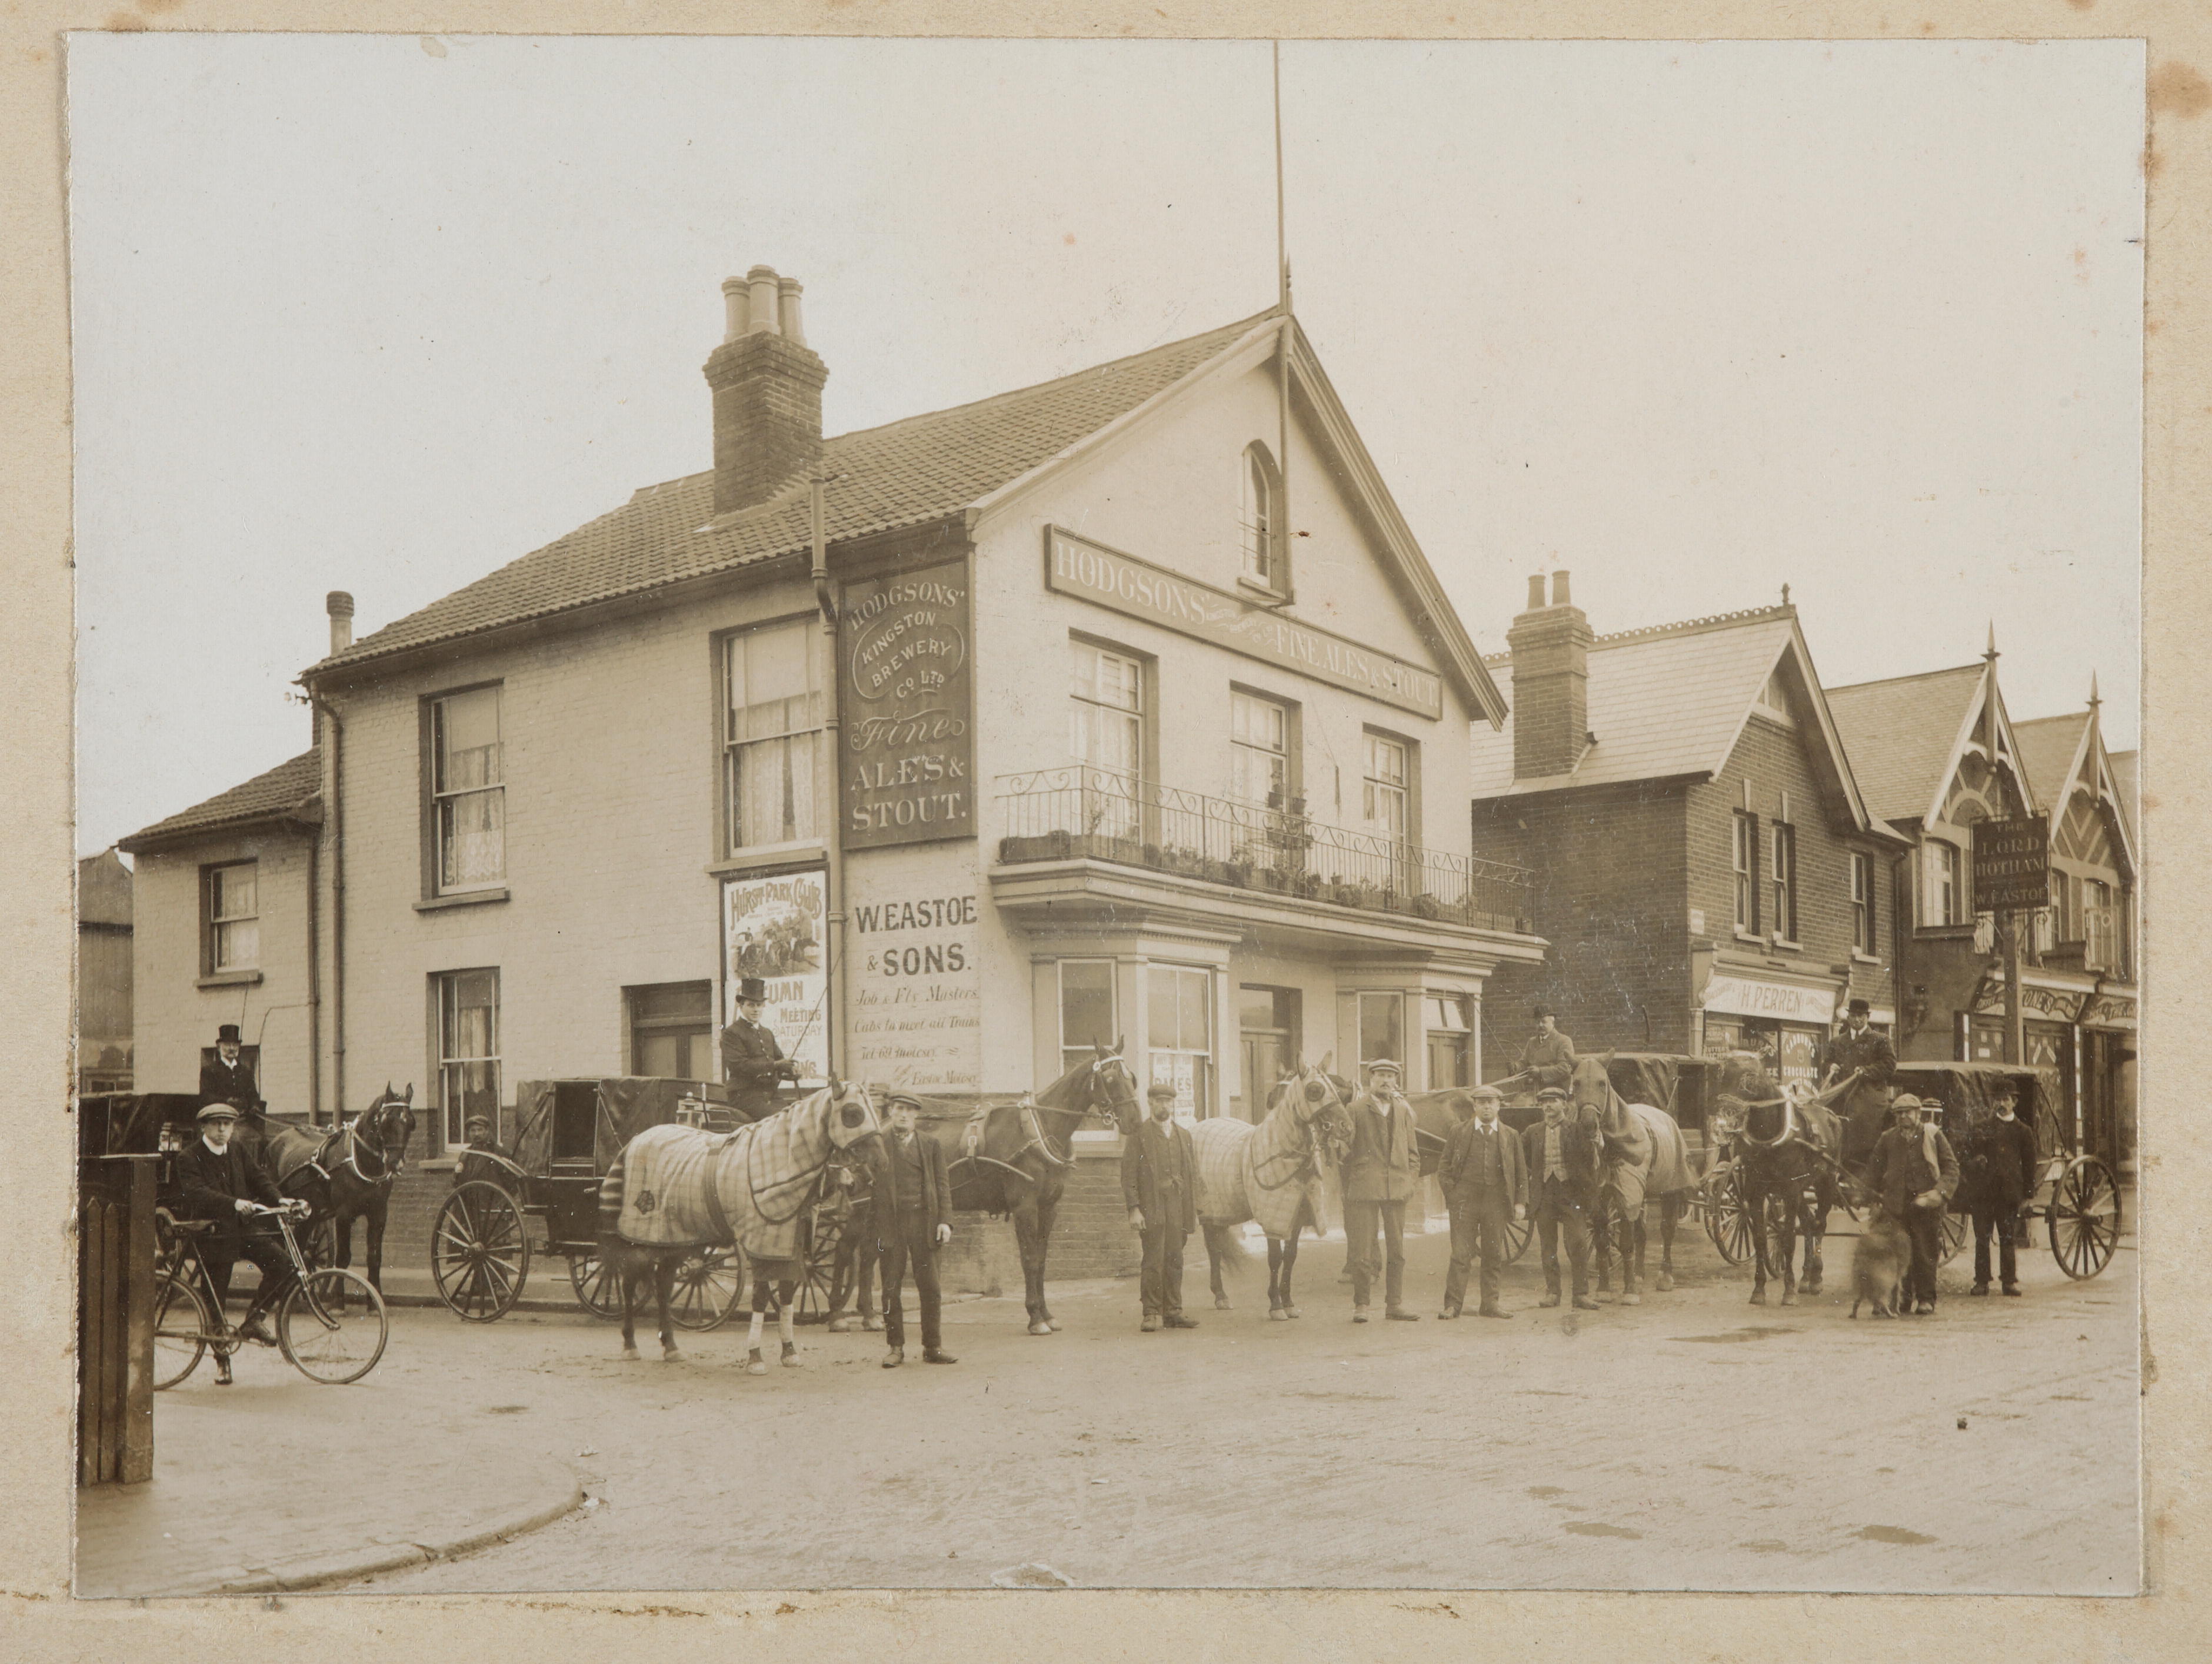 Photo of advert for Hurst Park meeting at Lord Hotham pub, 1910.